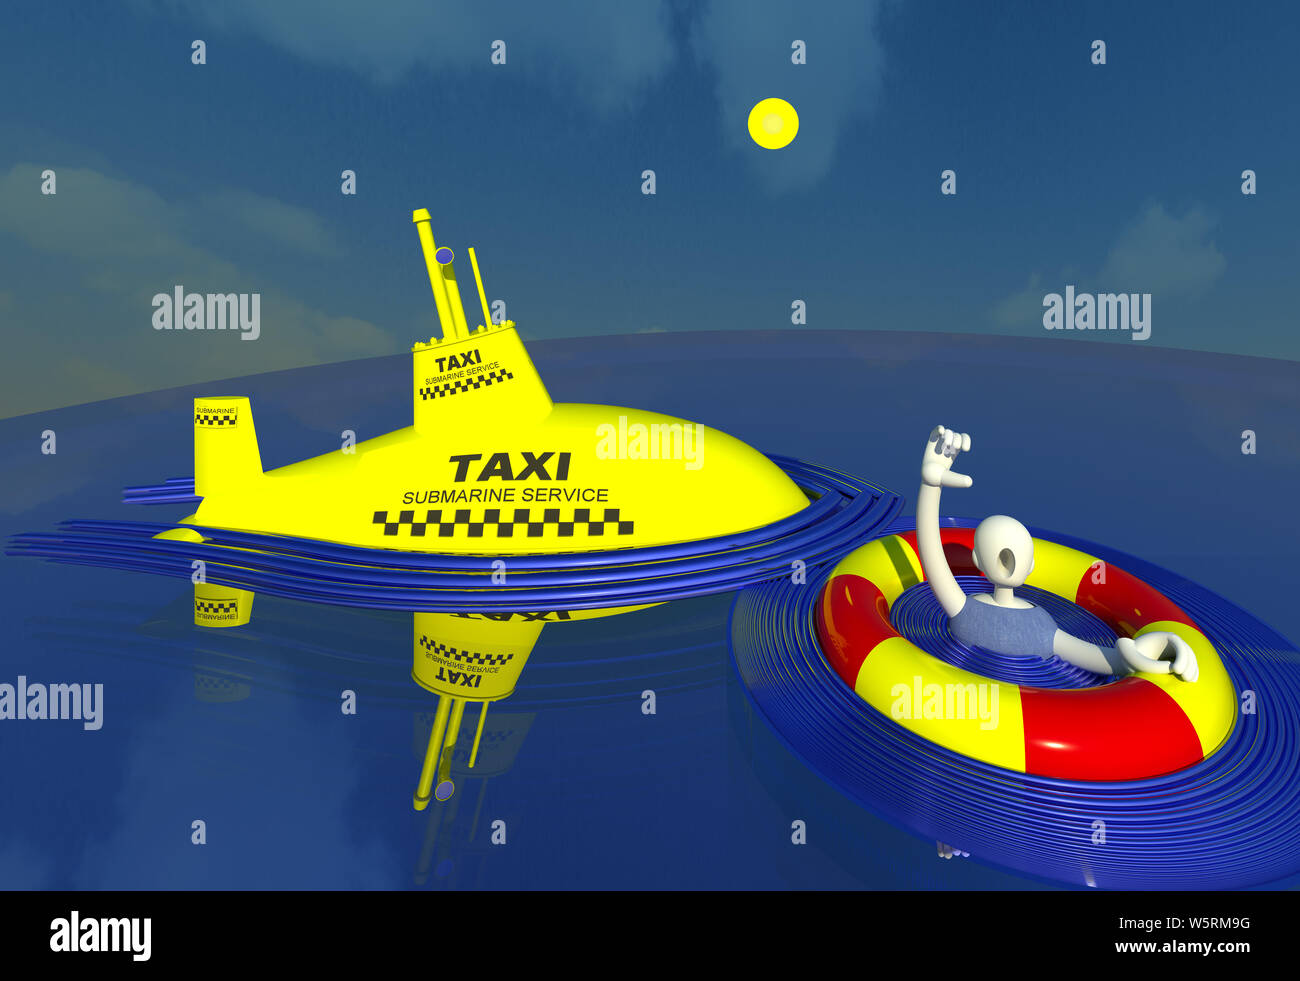 Unusual yellow cab submarine service in the sea 3D illustration 2. A drowning character calling a taxi in the middle of the ocean. Collection. Stock Photo